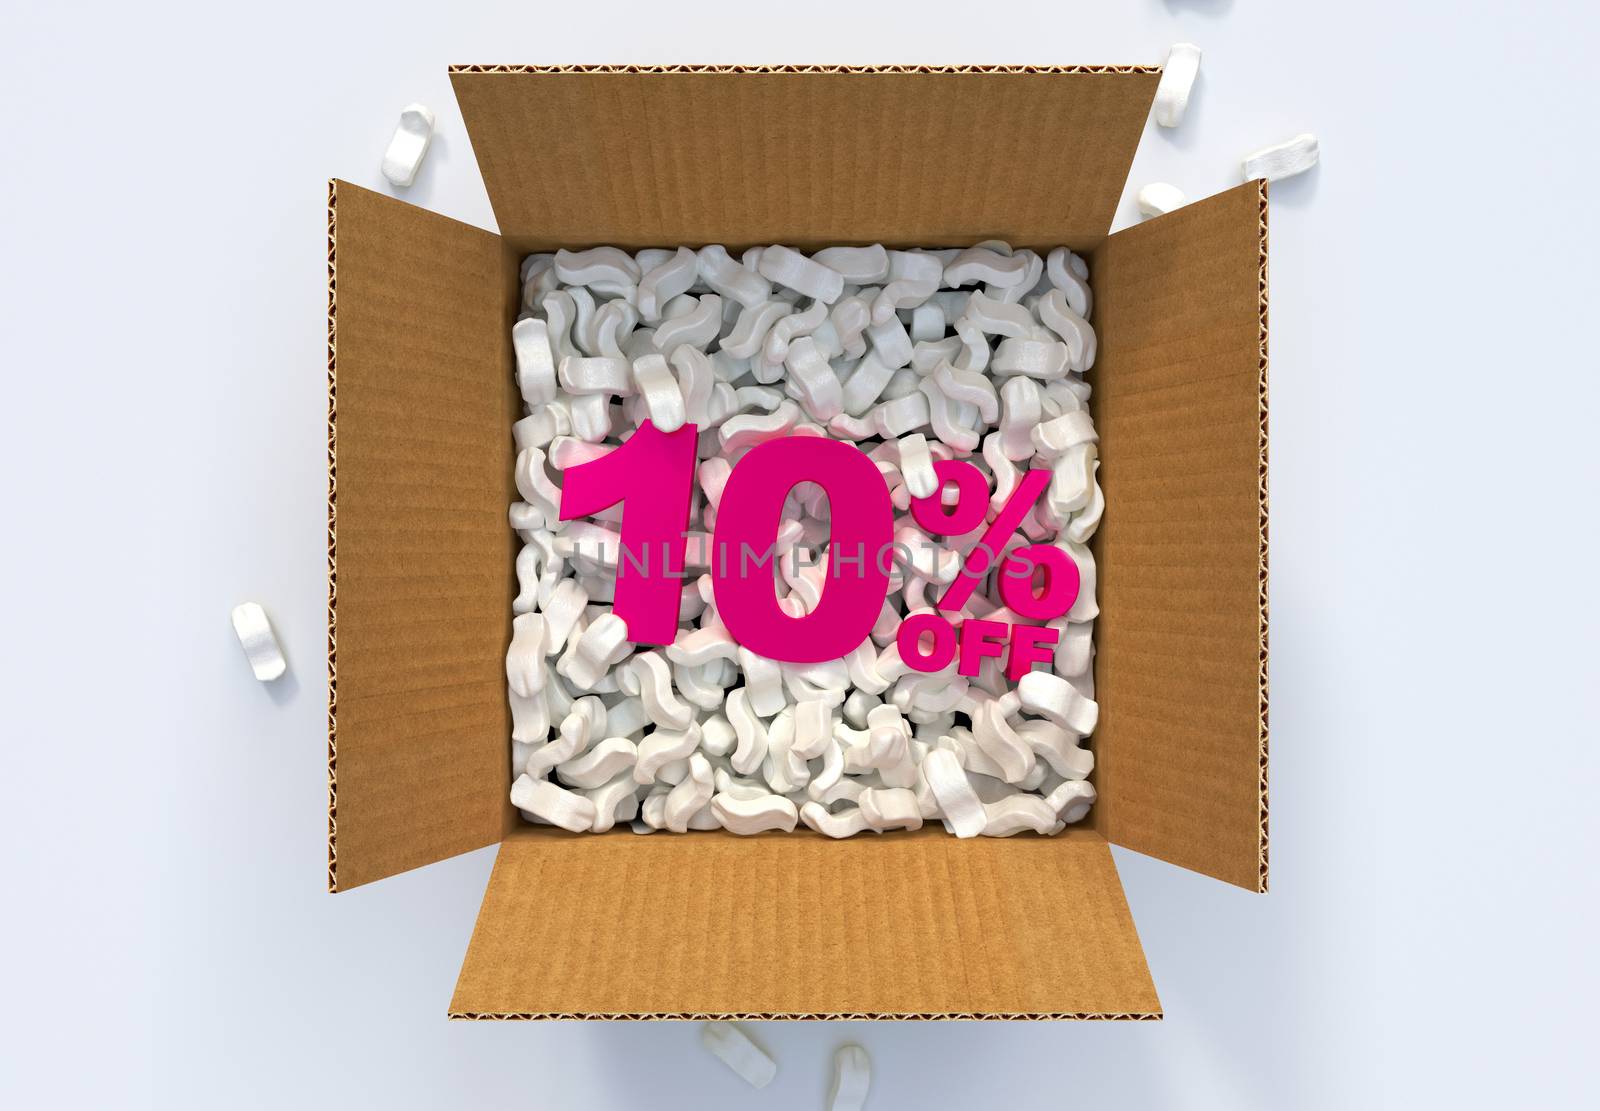 Box with shipping peanuts and 10 percent off sign by Barbraford